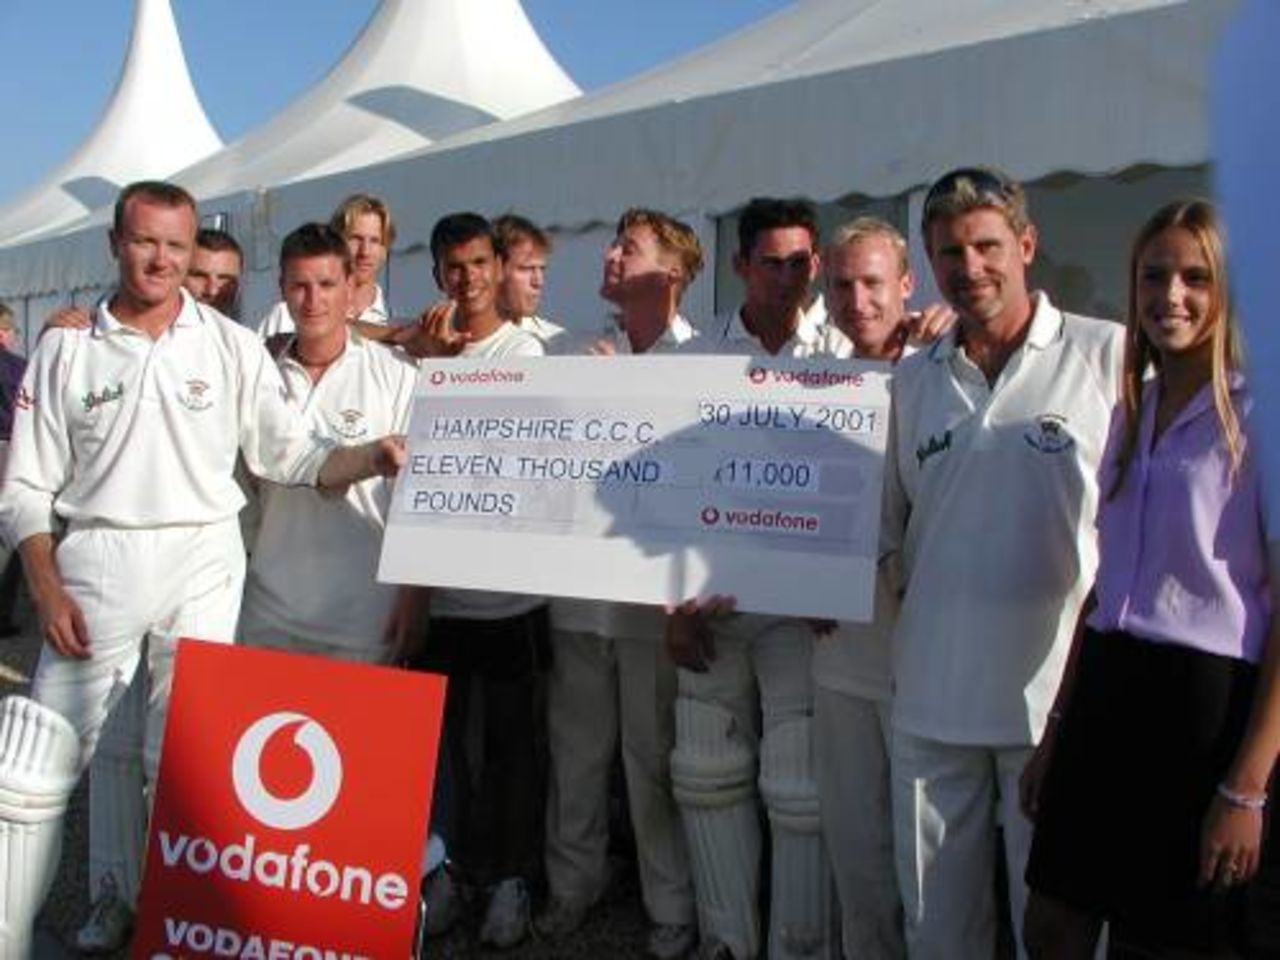 Hampshire players celebrate after receiving a cheque for £11,000 following their famous victory over Australia.